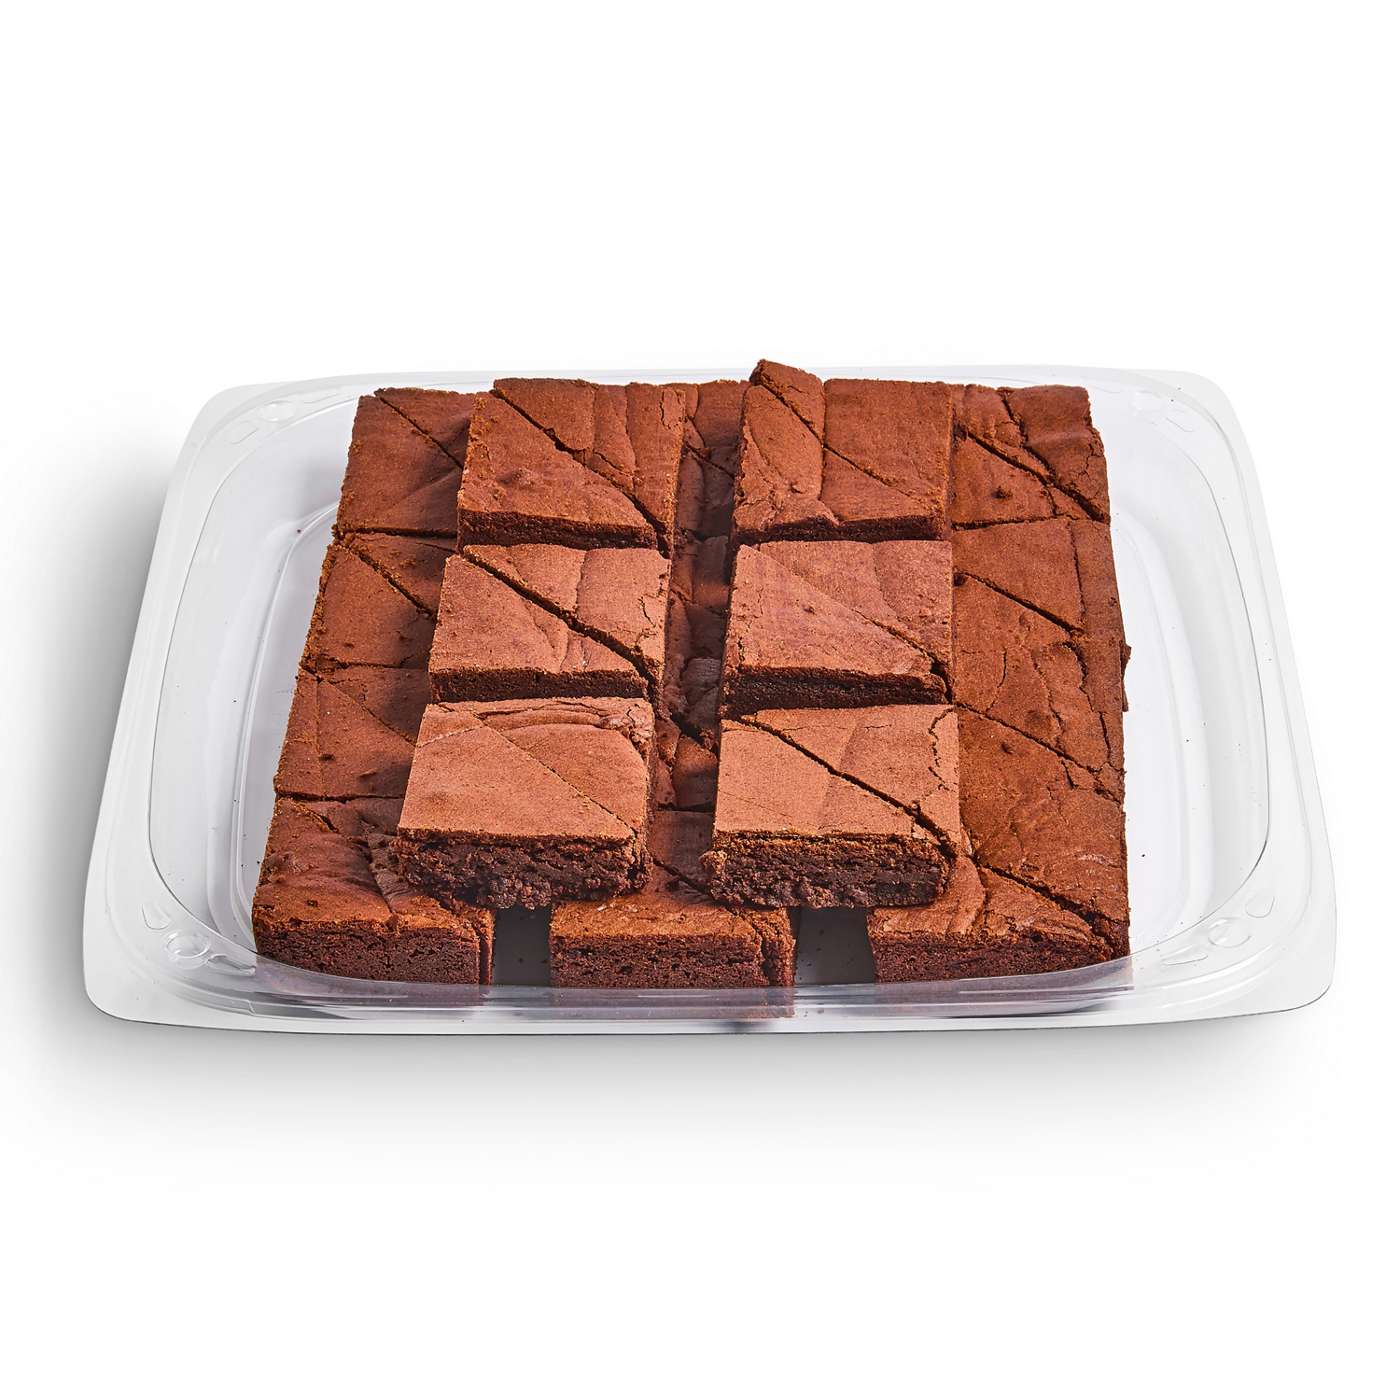 H-E-B Bakery Large Party Tray - Uniced Gourmet Brownies; image 1 of 3